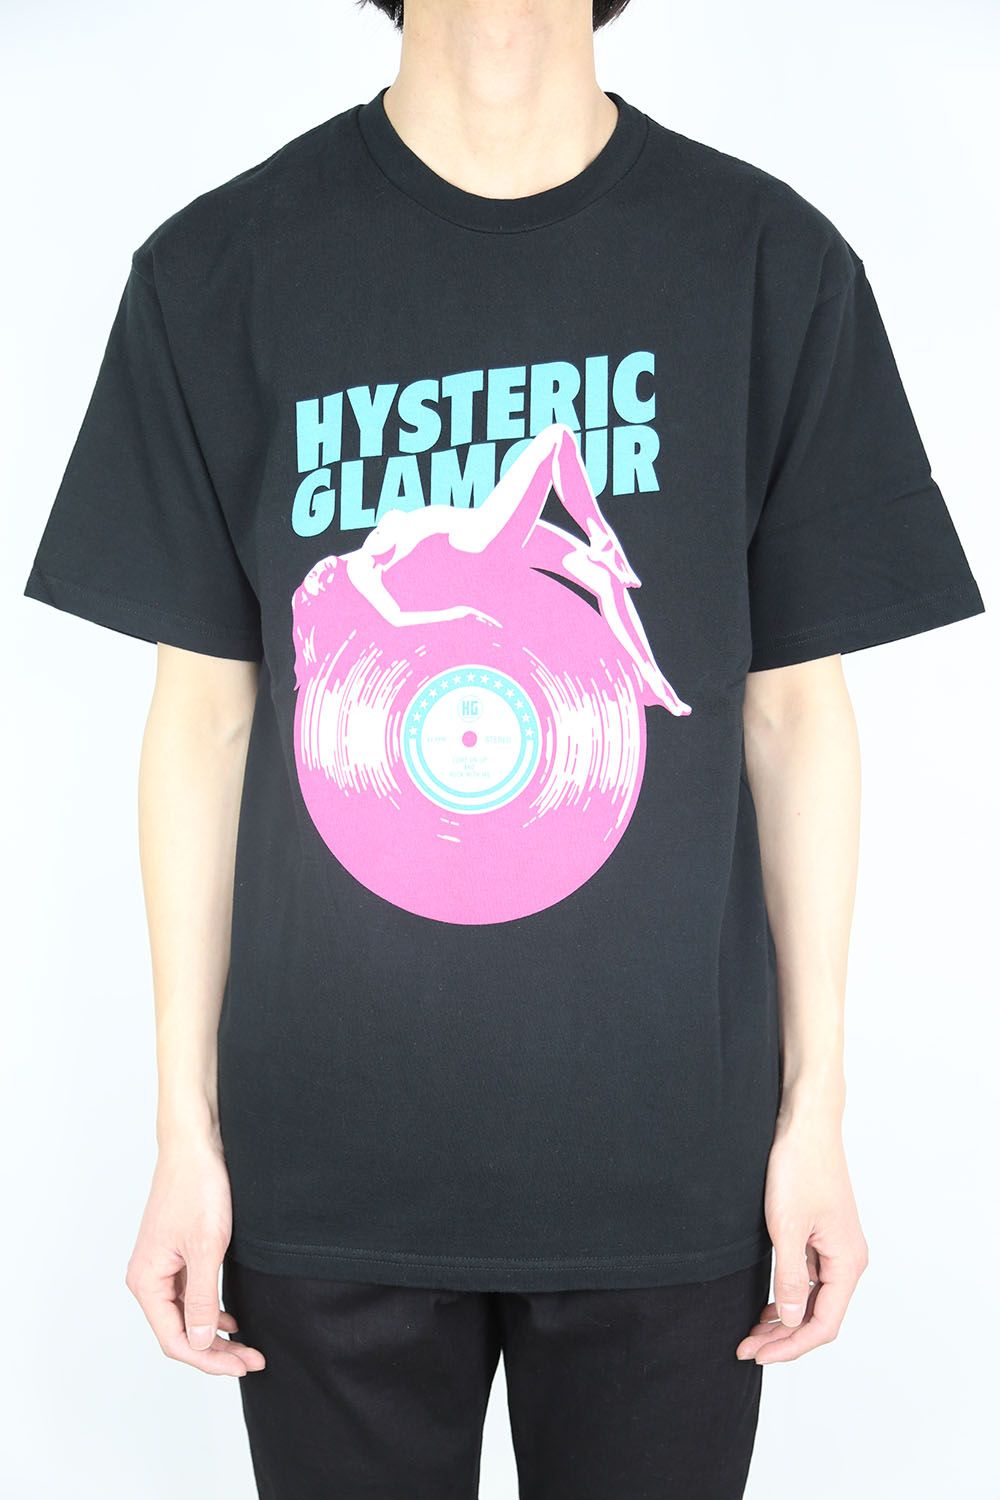 HYSTERIC GLAMOUR - SENSUAL SOUNDS Tシャツ / ブラック | Tempt